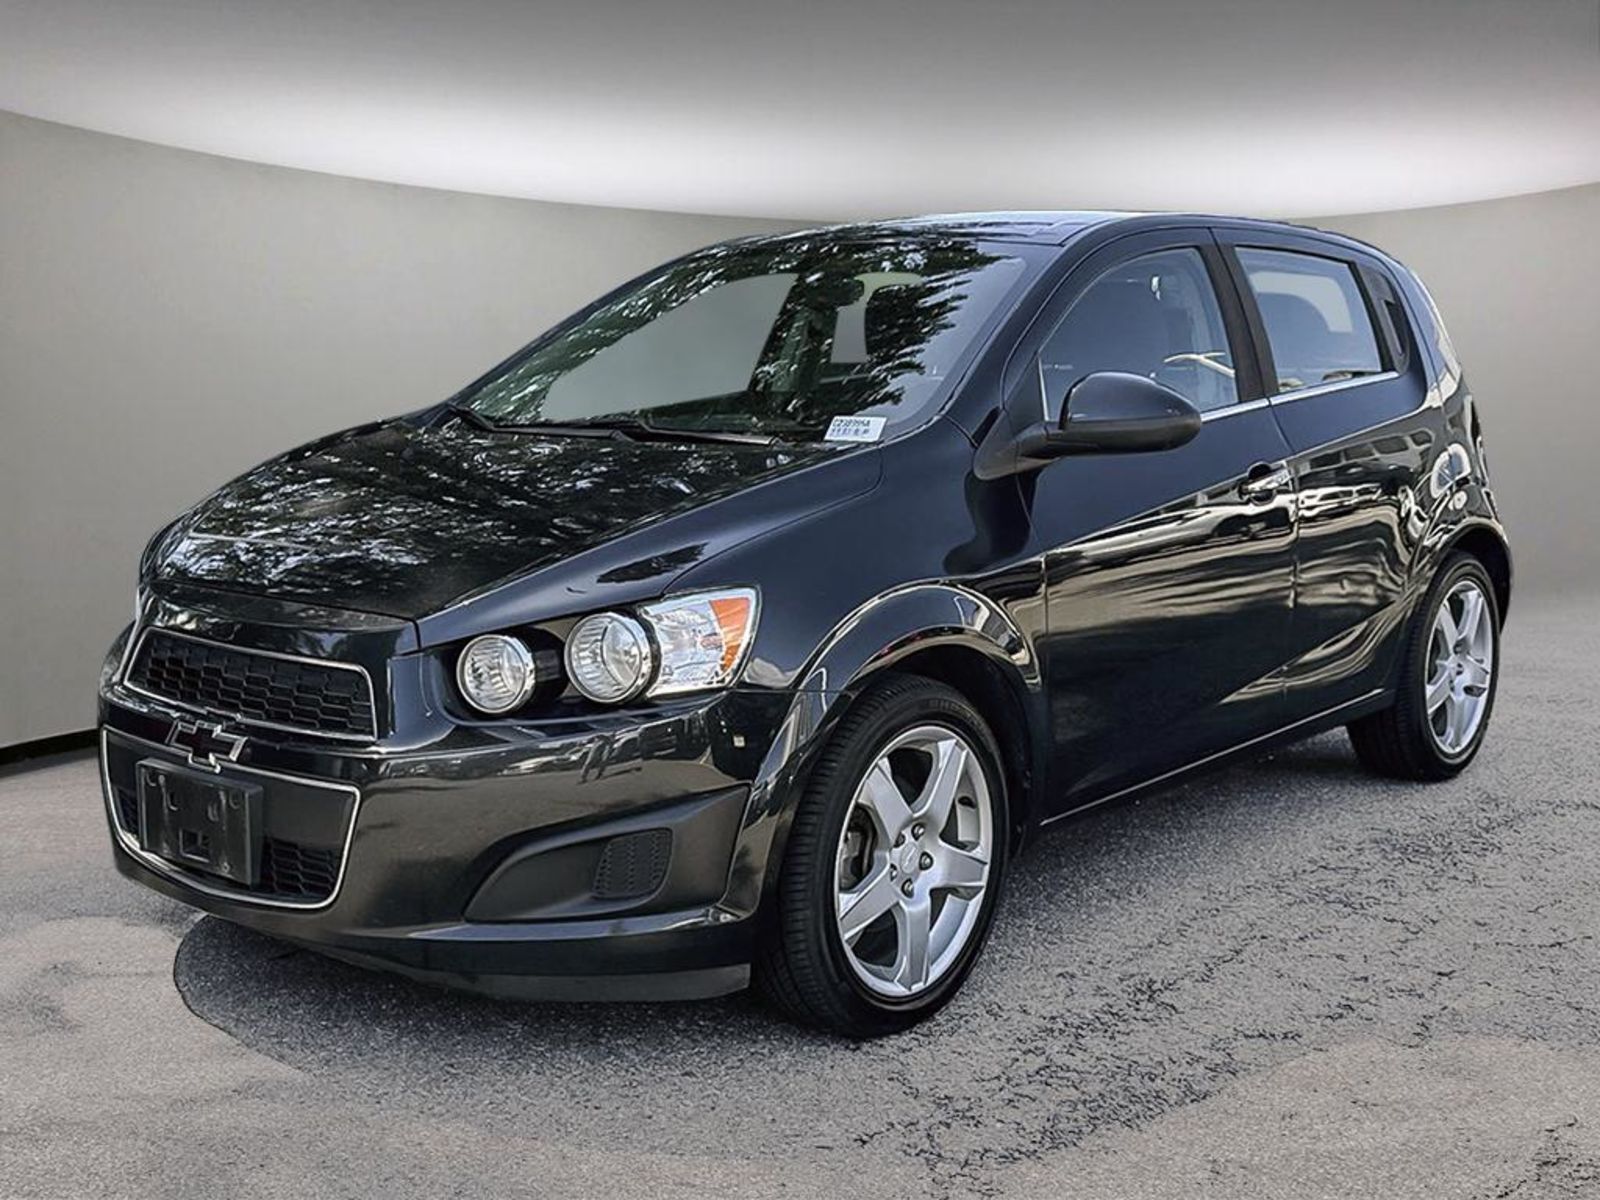 2014 Chevrolet Sonic LT - Manual / Cruise Control / No Extra Fees